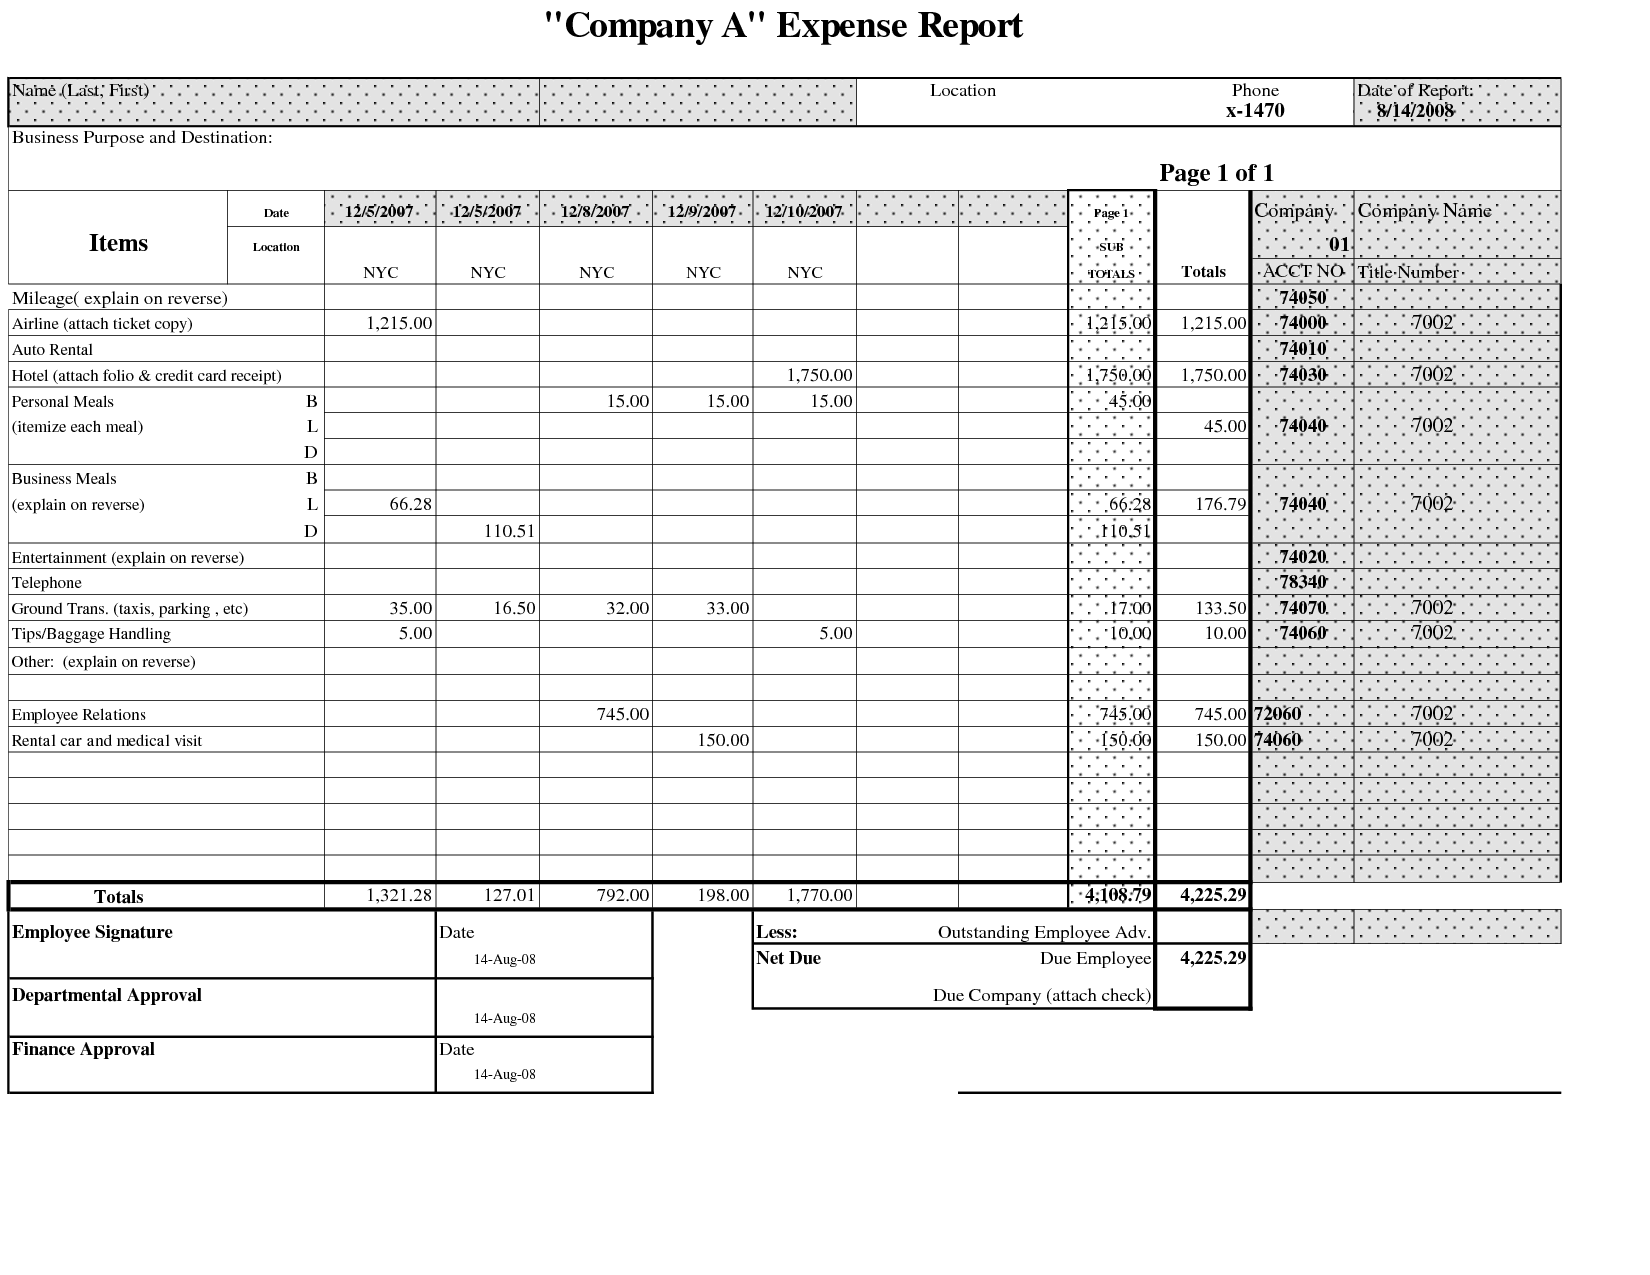 Office Supply Expense Report Template